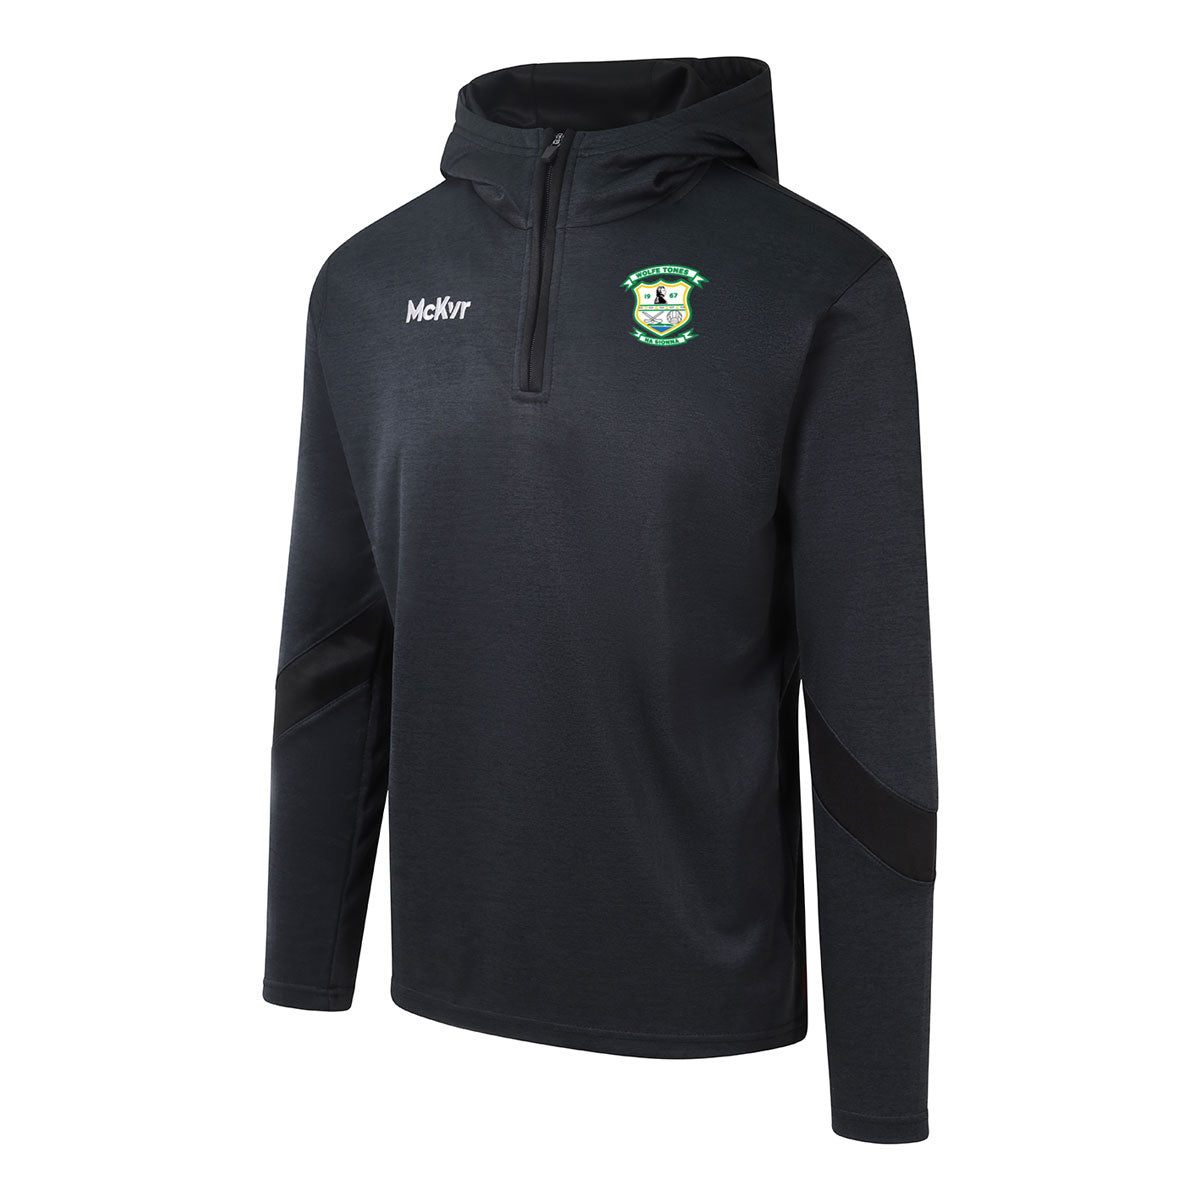 Mc Keever Wolfe Tones Na Sionna, Clare Core 22 1/4 Zip Hoodie - Youth - Black